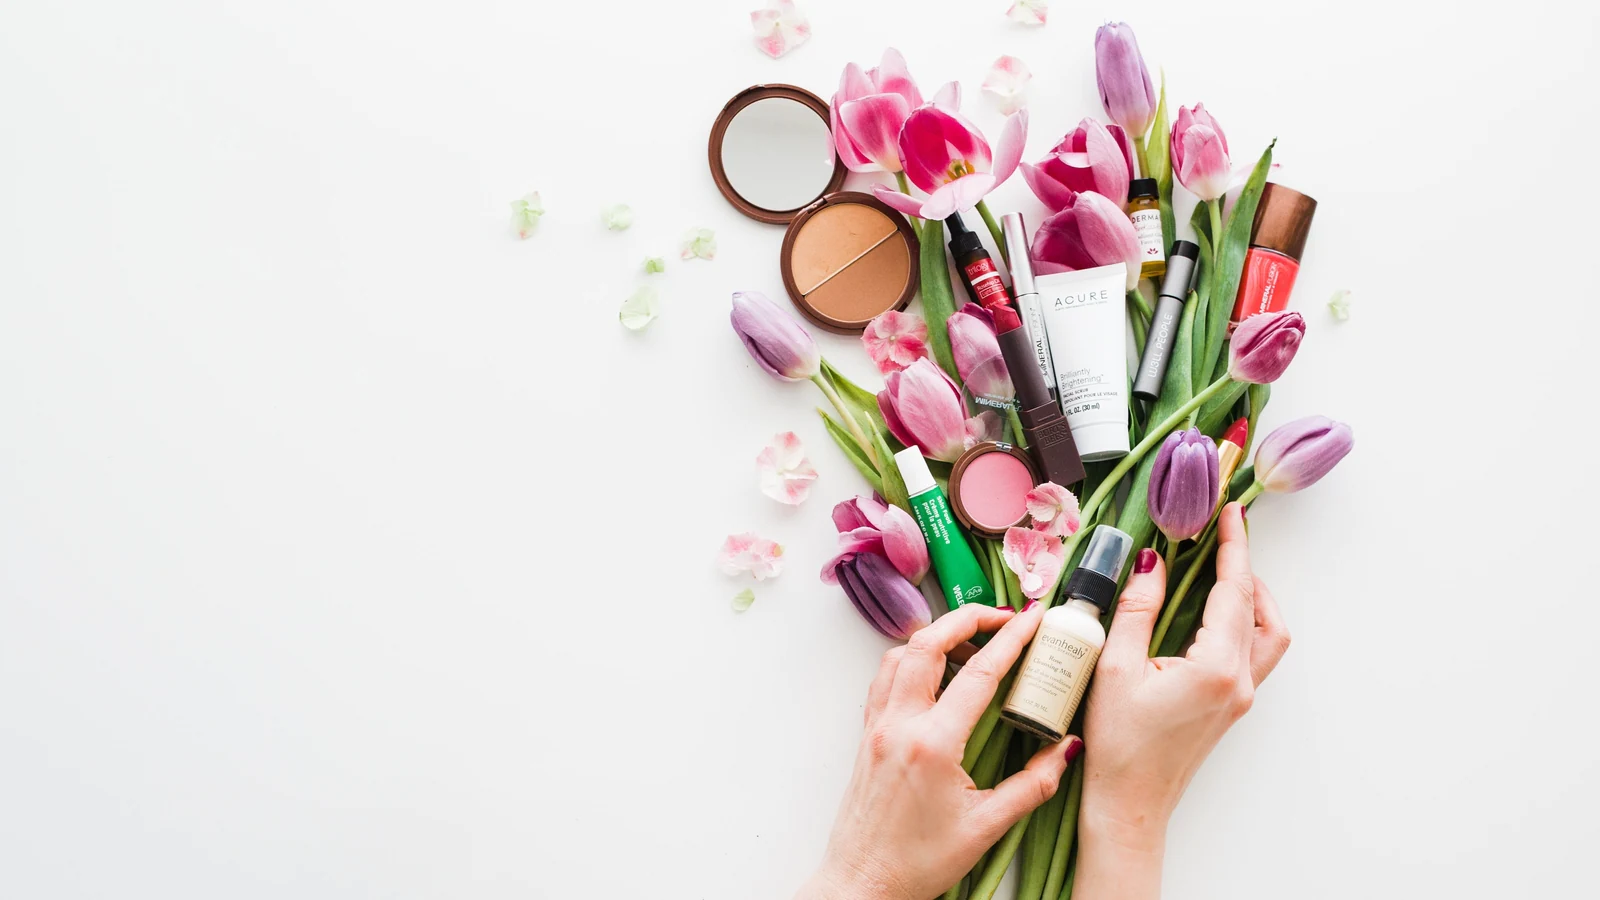 Beauty trends for 2022 – Trends that would reshape the beauty industry in 2022